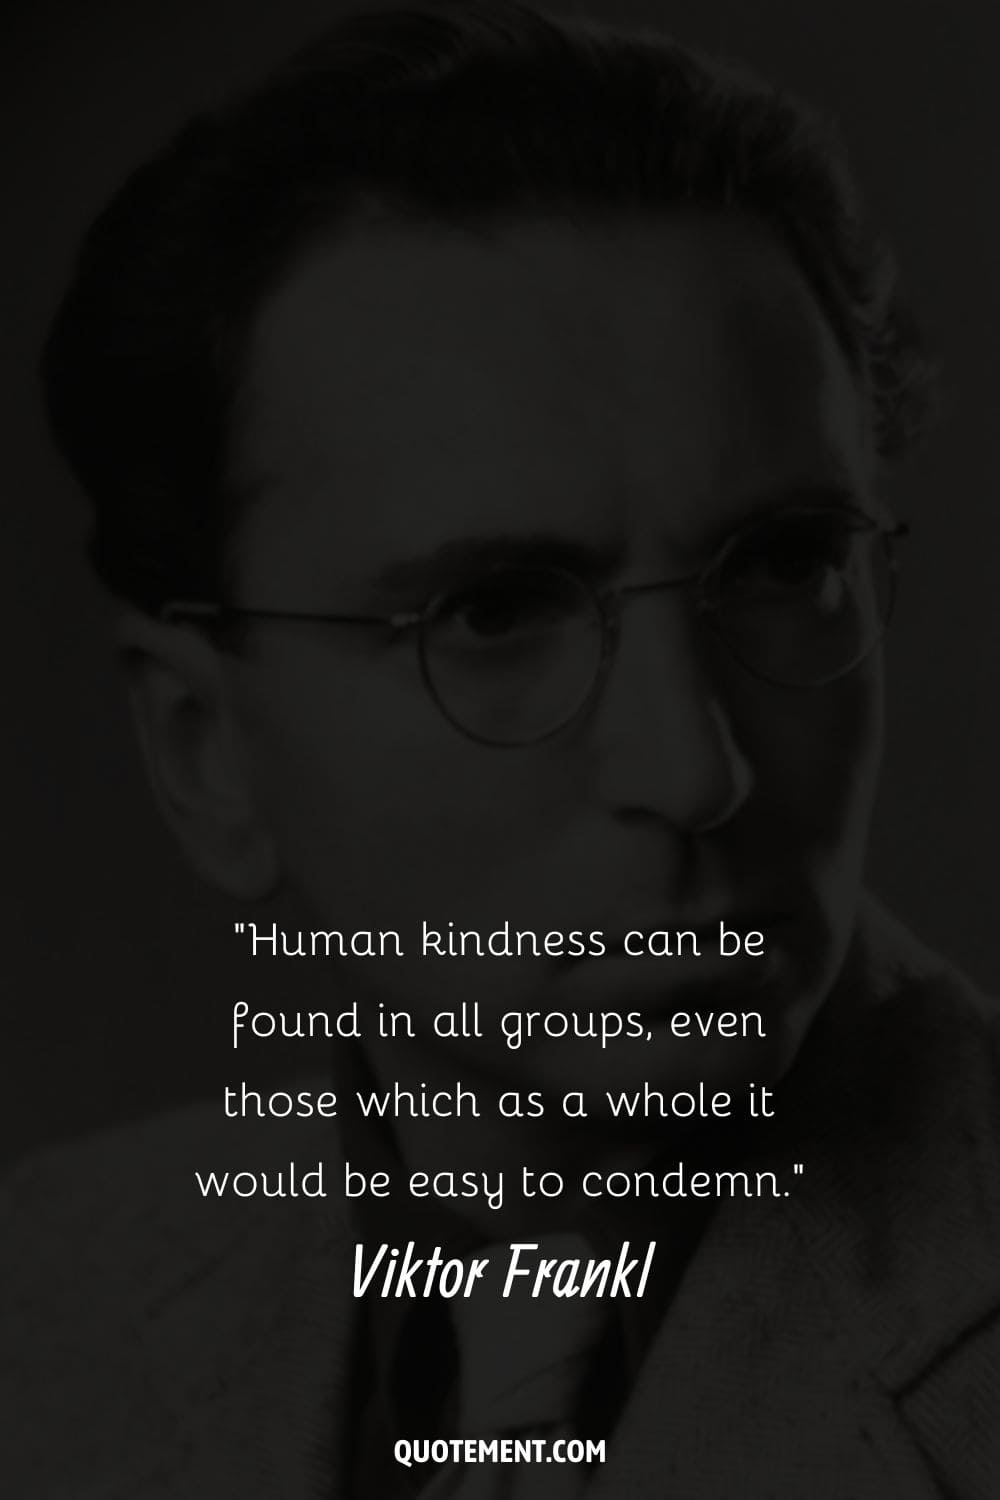 Image of Viktor Frankl representing his quote on human kindness.